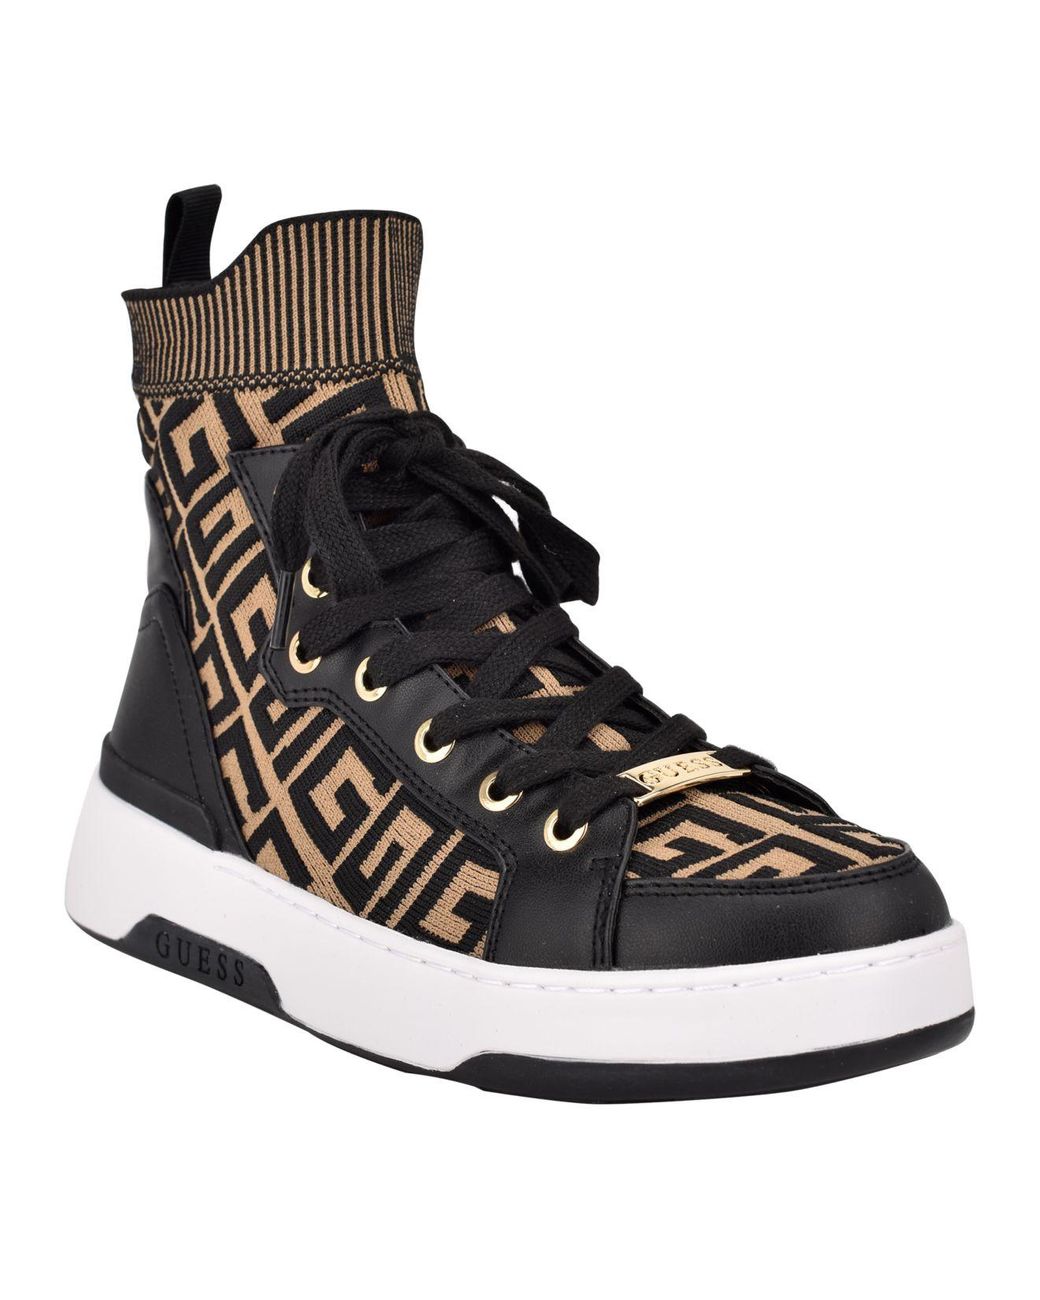 Guess Manney High Top Logo Sneaker in Black | Lyst